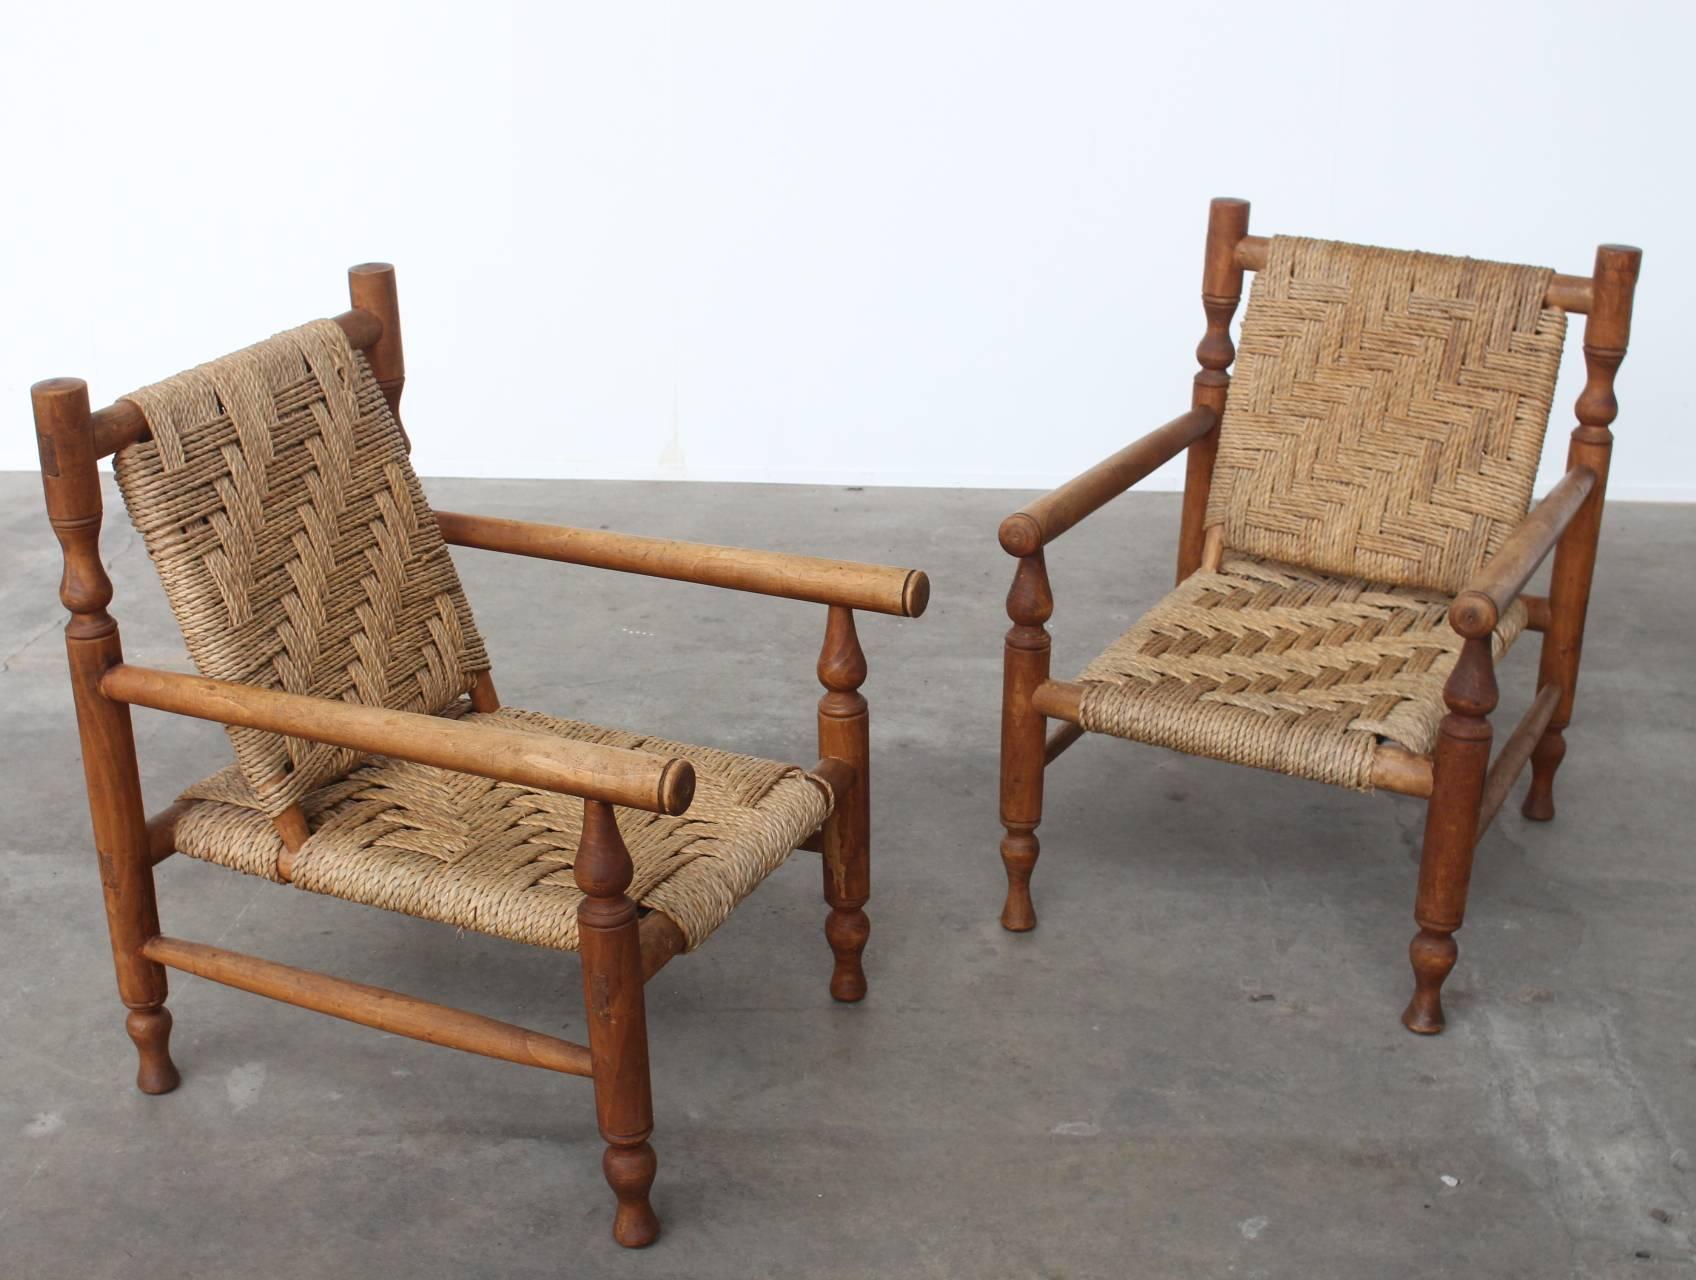 Pair of French lounge chairs in the style of Charlotte Perriand.
The frame of the chairs are build out of ash wood and come with a woven sisal rope seat and backrest.
The chairs do have a craftsmanship structure and are beautiful